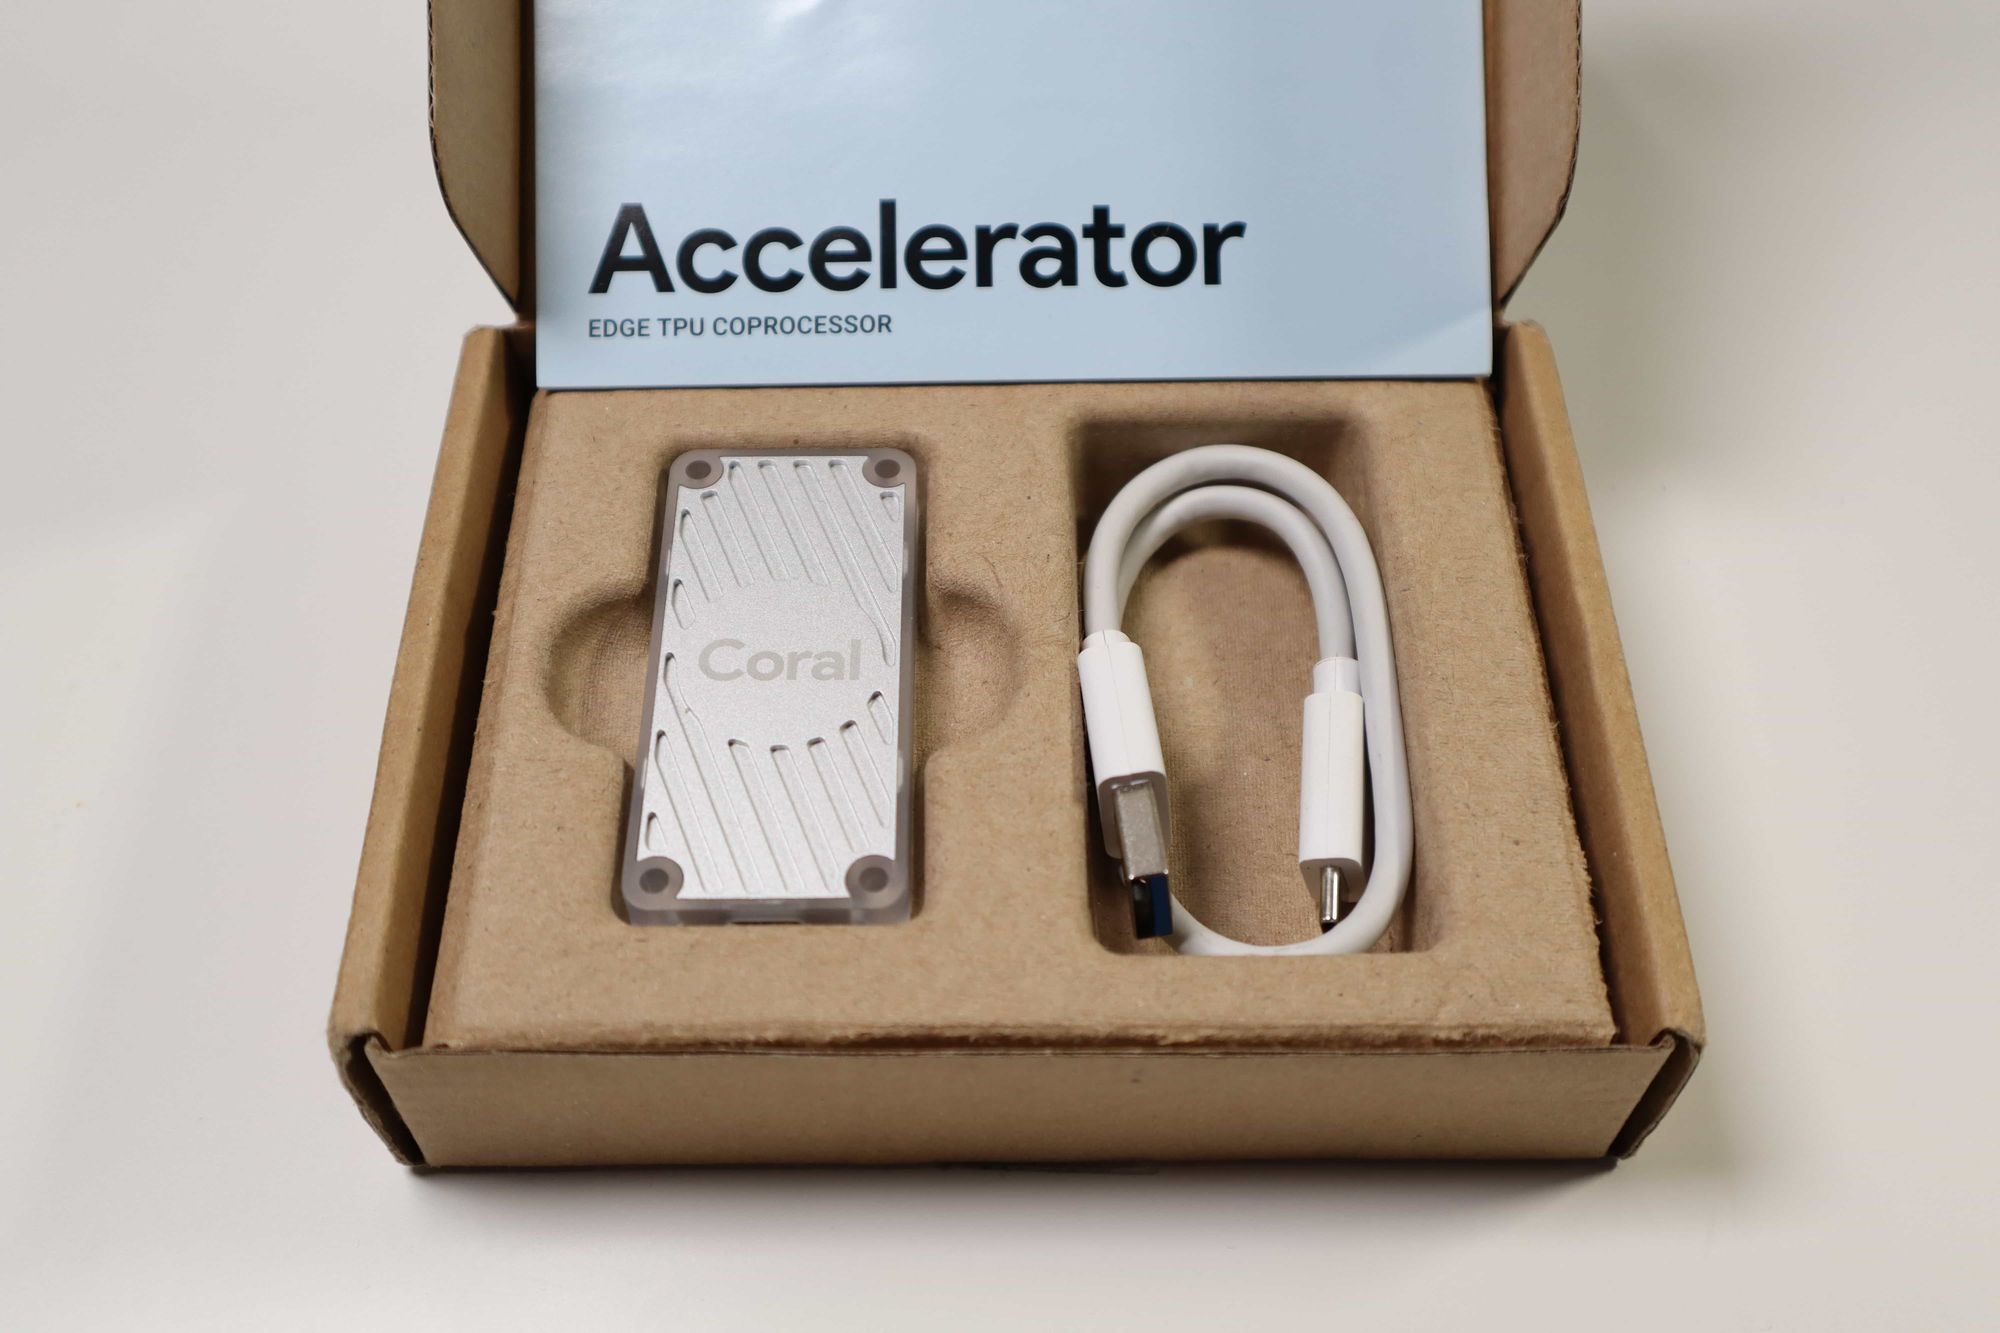 Box contains the USB Accelerator, USB Type-C to USB 3 Adapter and a simple getting started instruction